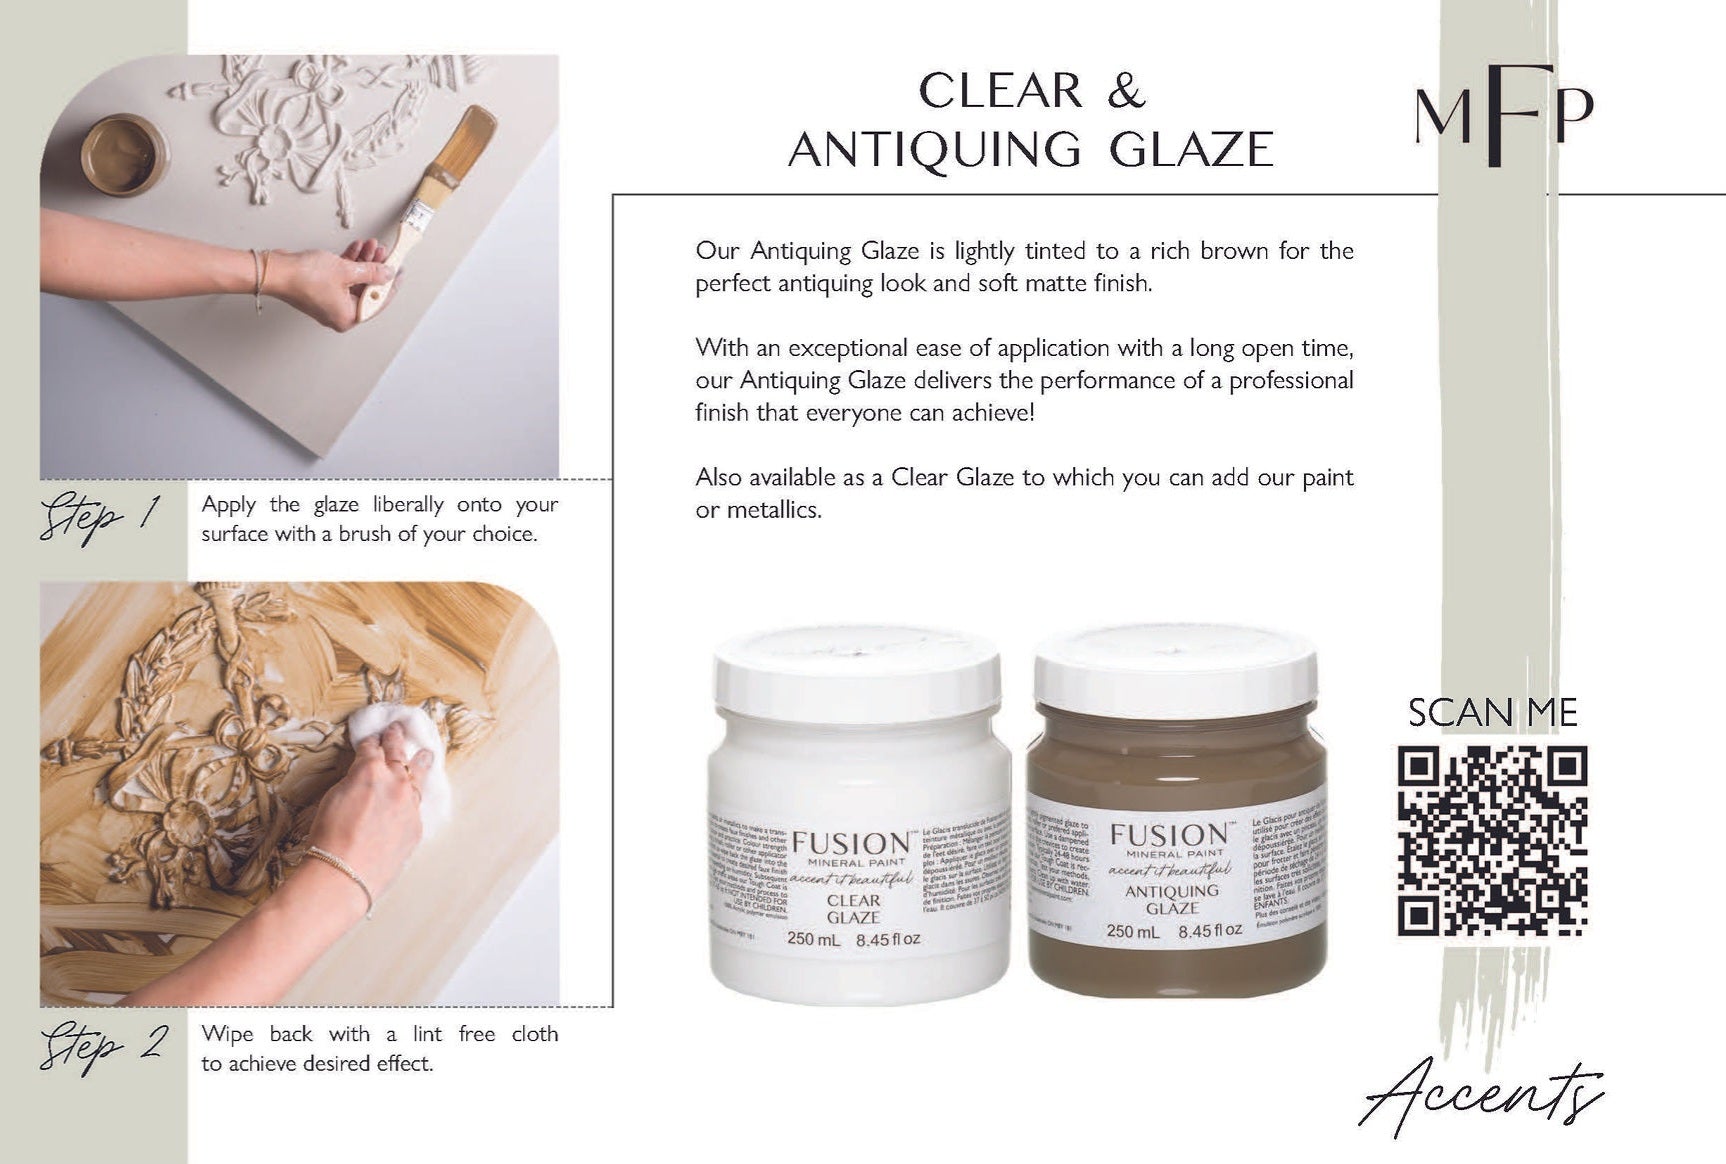 Instructions for using fusion antiquing and clear glaze